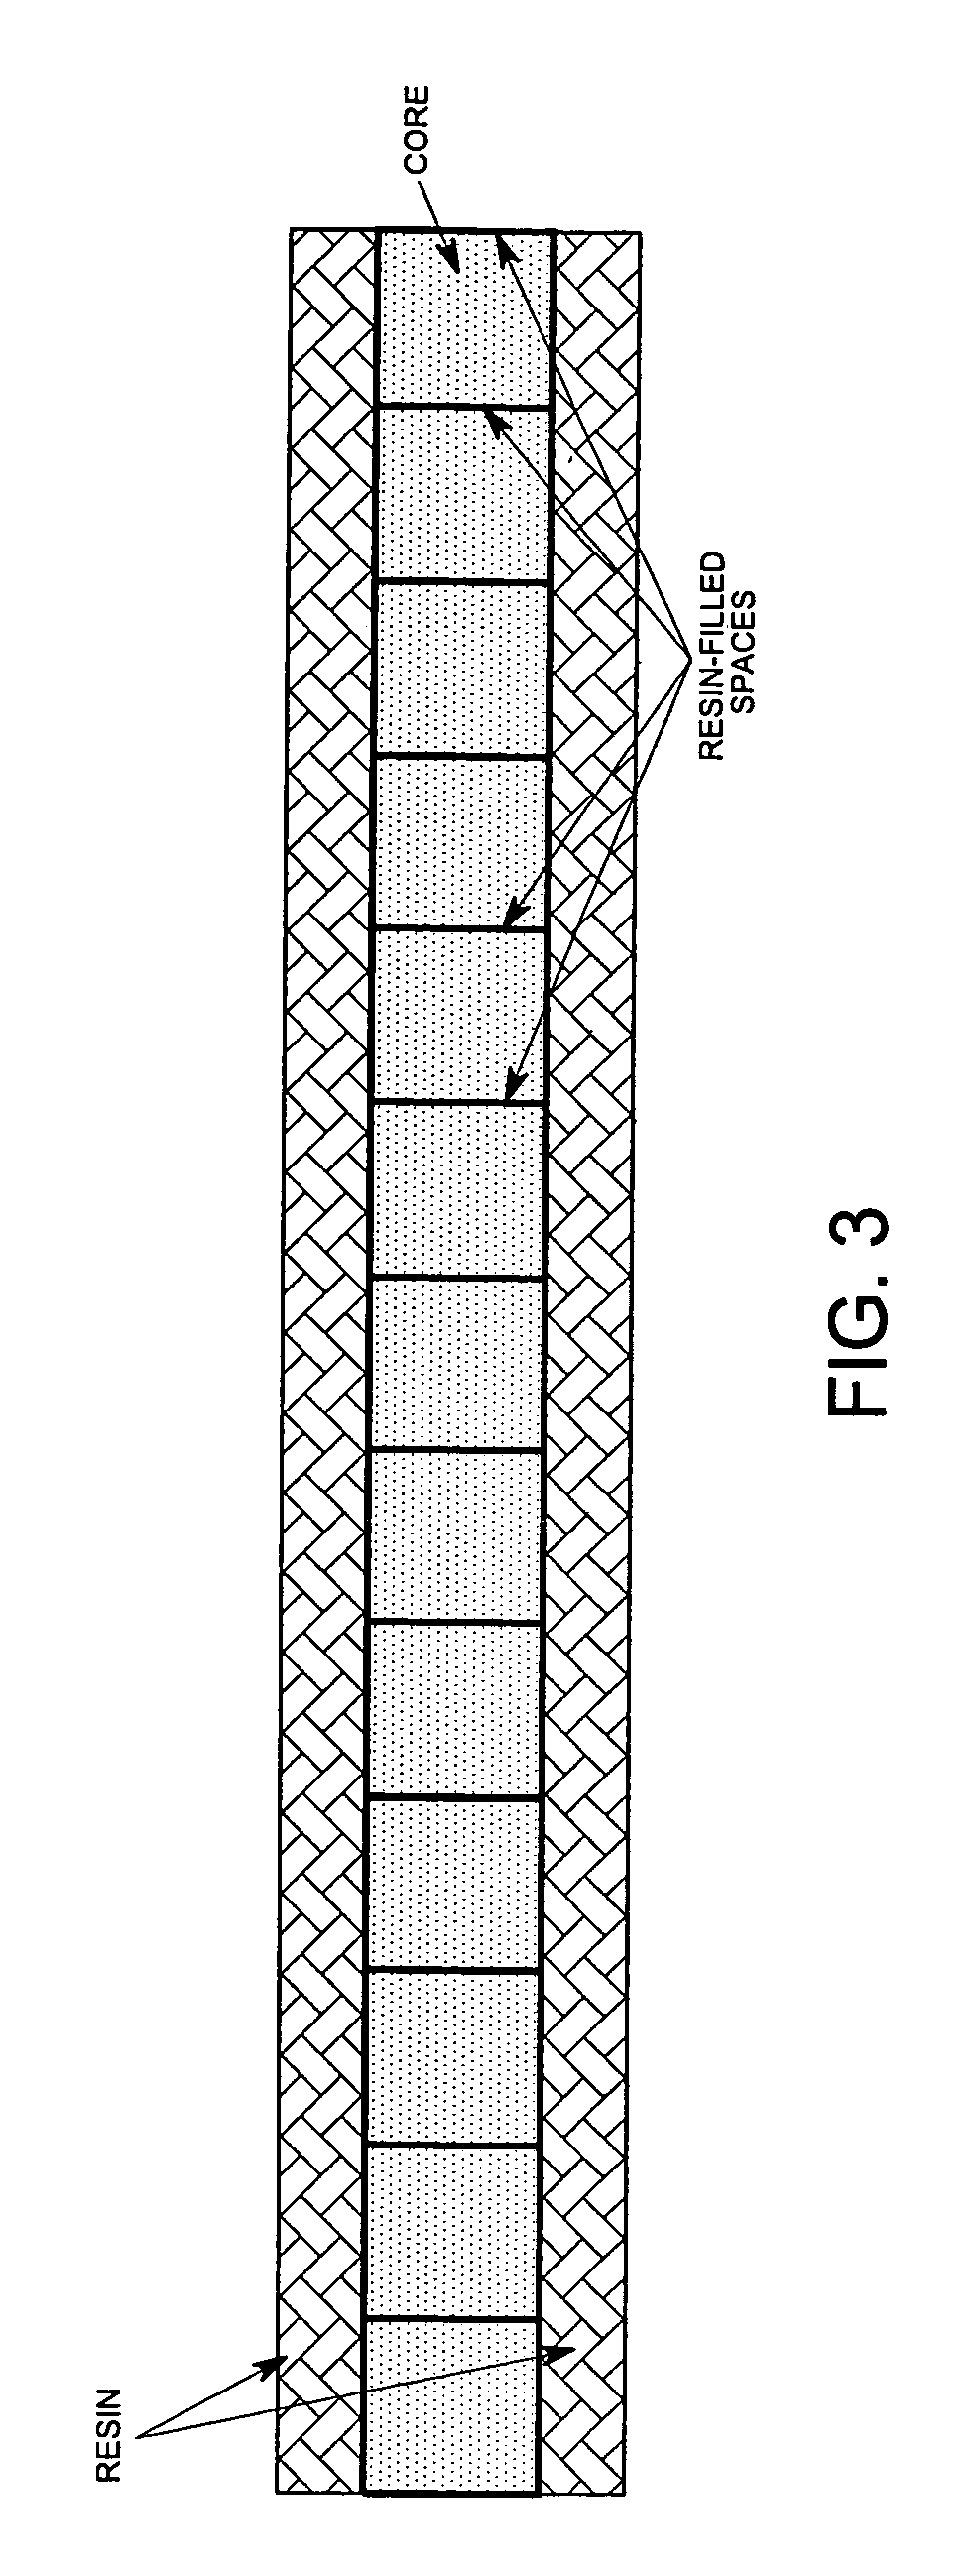 Dual cure compositions, methods of curing thereof and articles therefrom